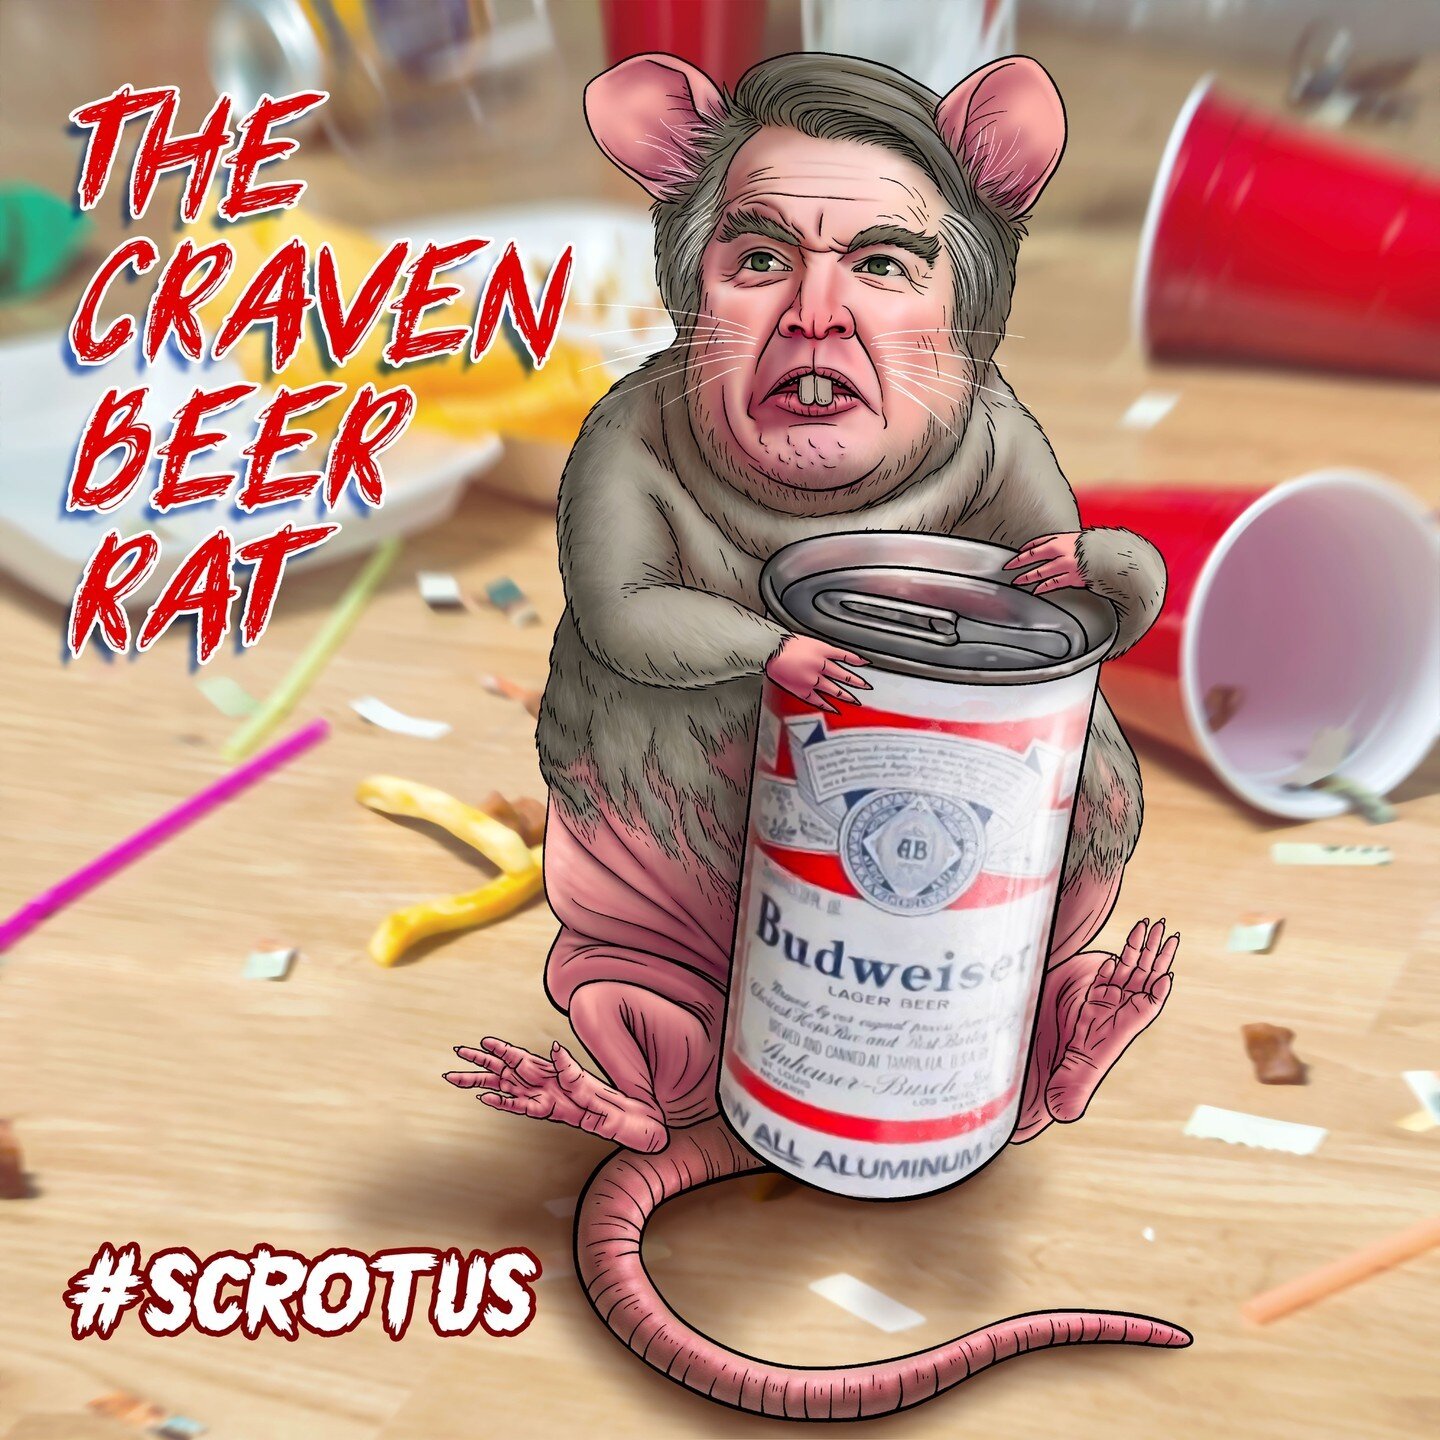 #SCROTUS Let's GOOOOOO! ⁠
For the first member of team #SCROTUS, I present to you, The Craven Beer Rat!  He likes beer, he still likes beer, he drinks beer. Okay? ⁠🍺🐀⁠
⁠
Alternate name for this pathetic creature is, of course, &quot;The Kava-Naw&qu